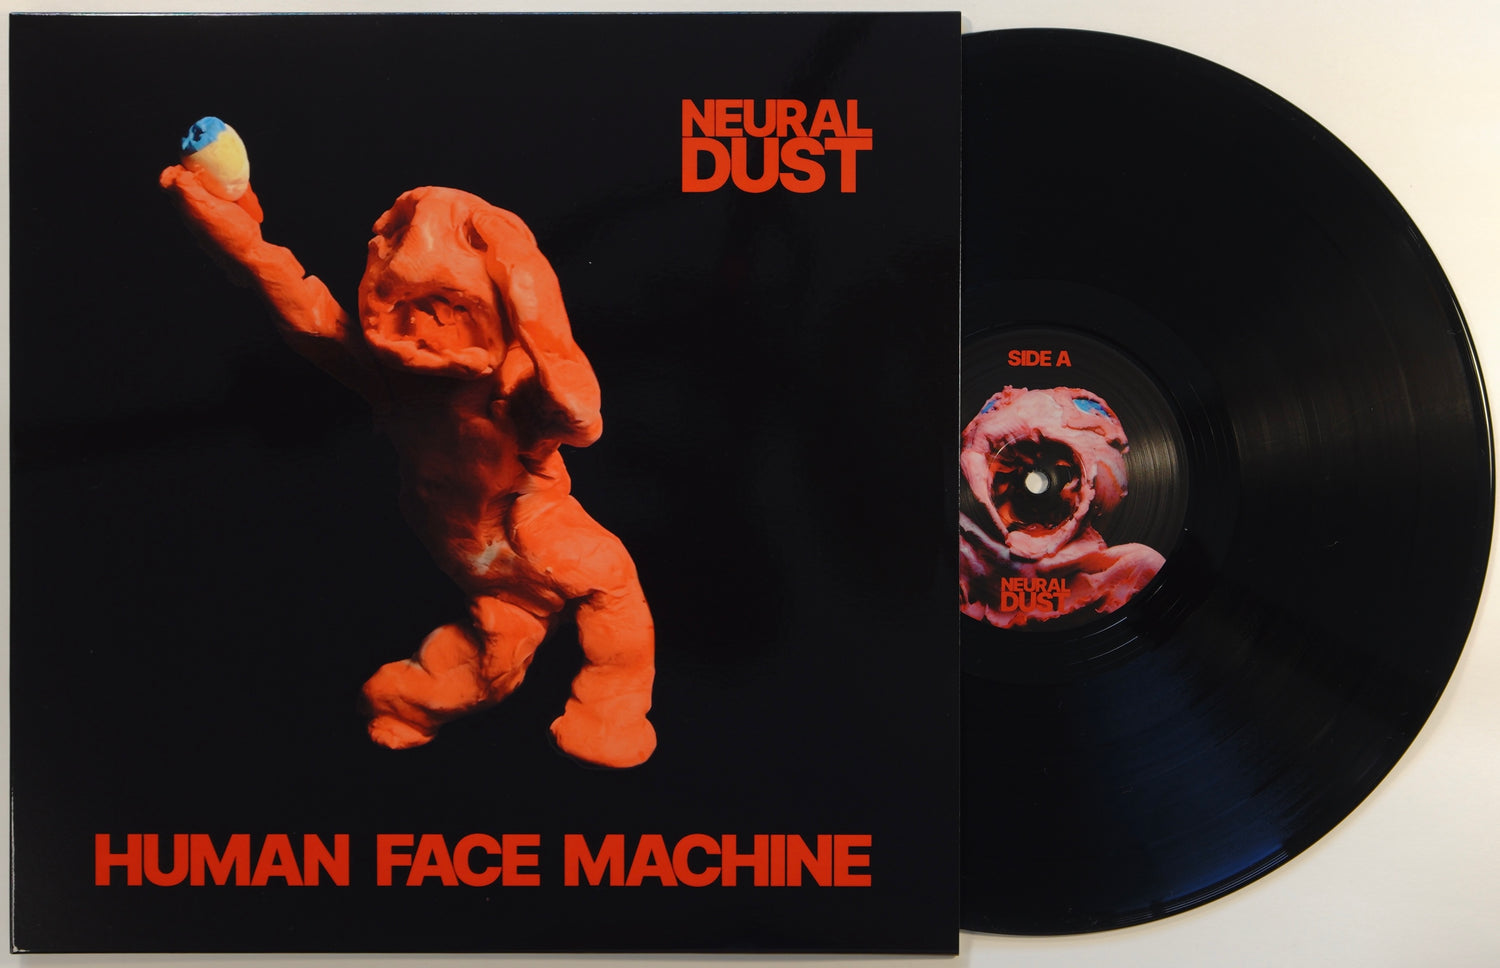 Neural Dust - HUMAN FACE MACHINE (Available Now)